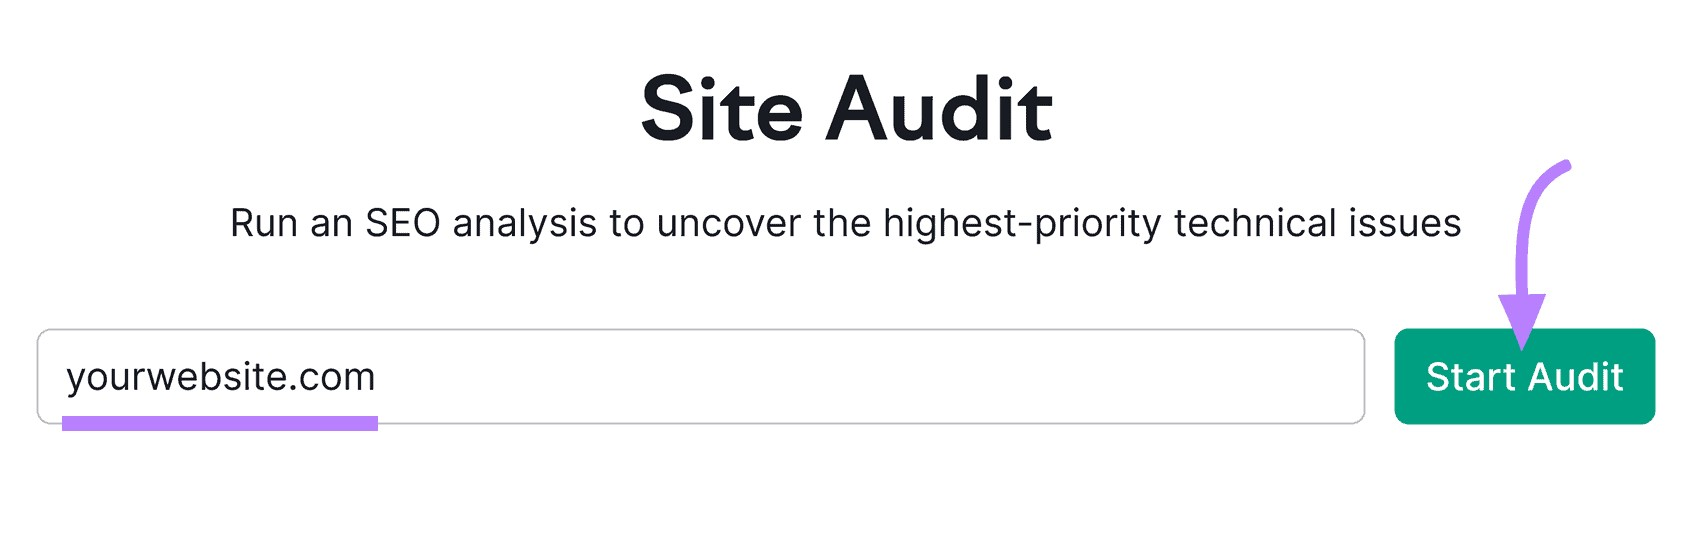 Site Audit tool search